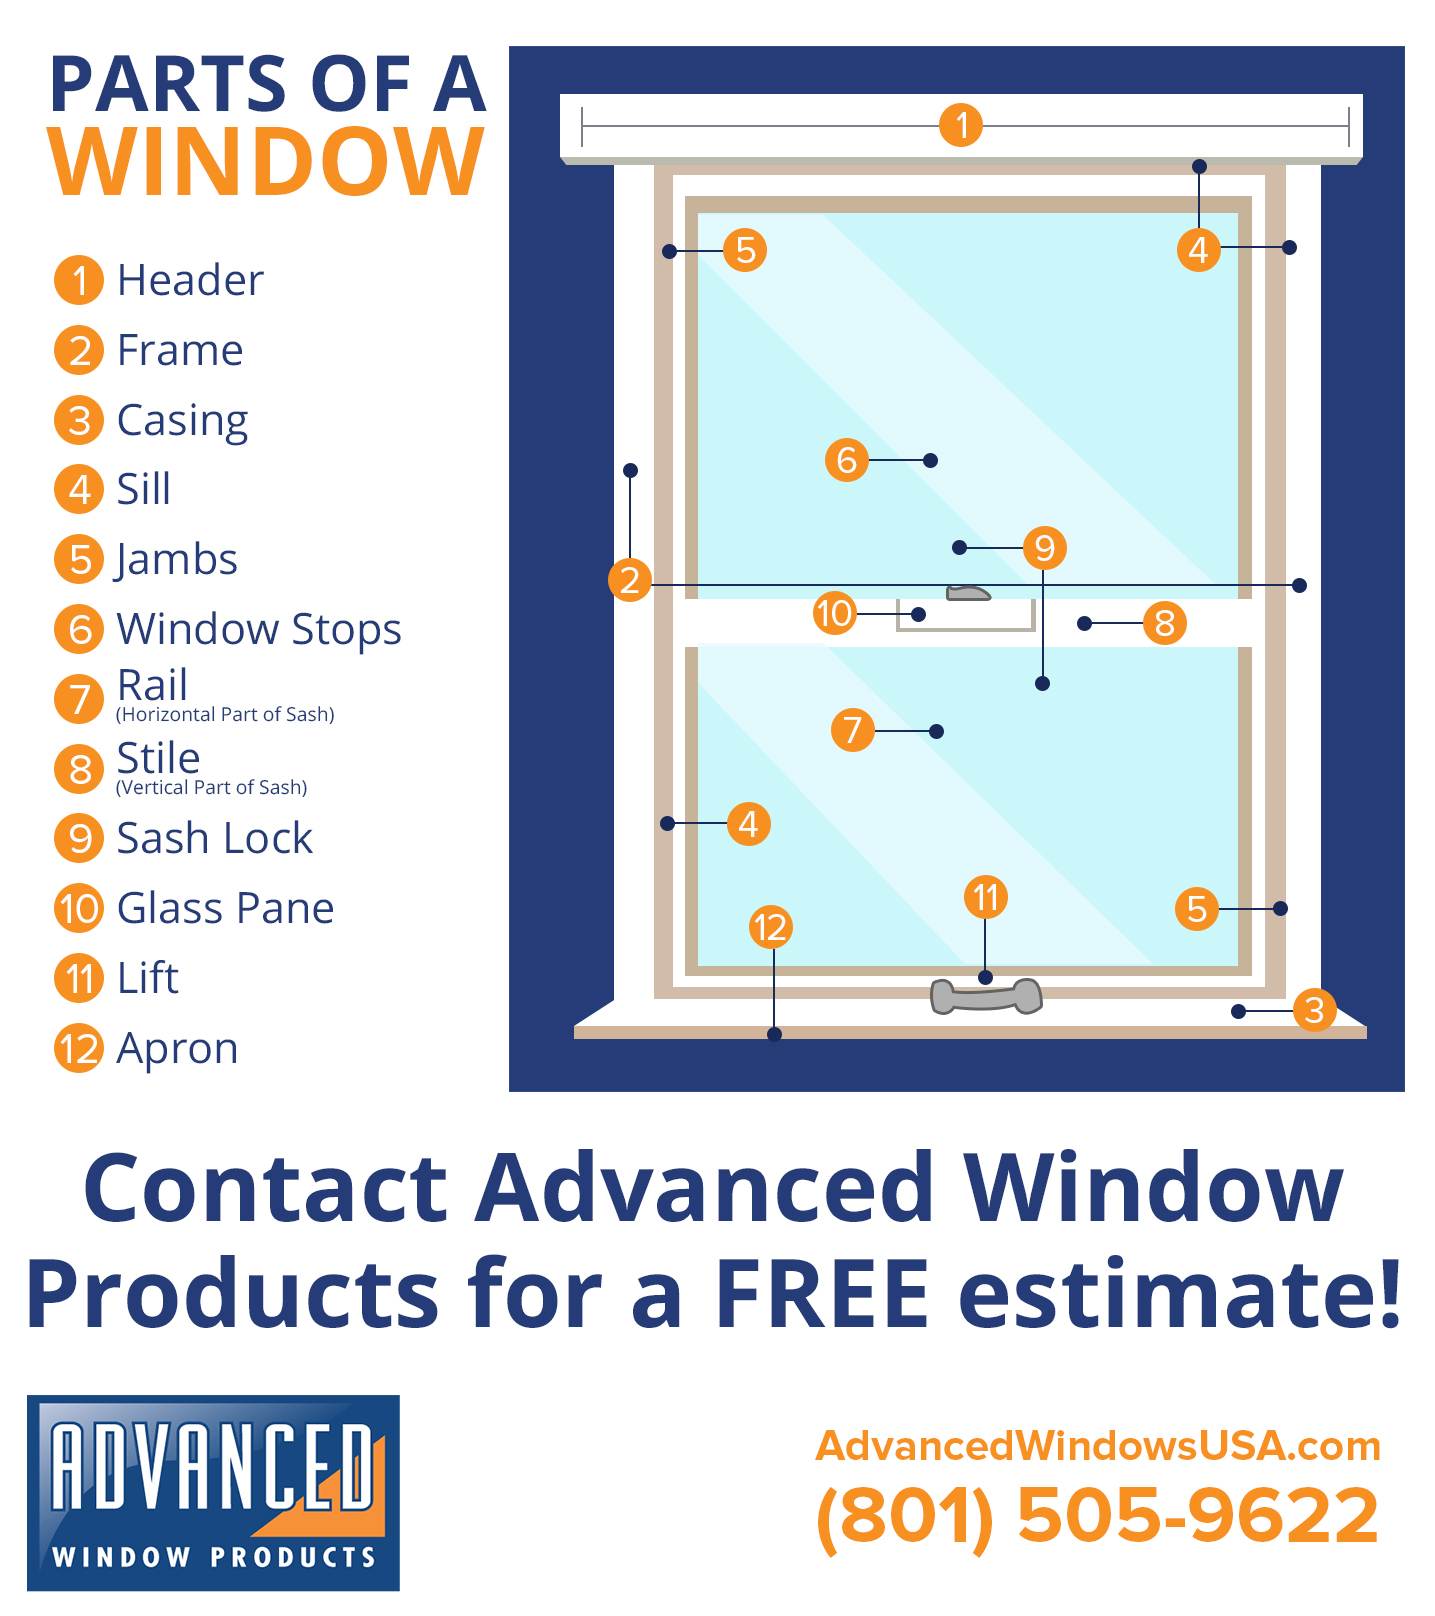 For More Information on Windows or Window Terminology, Contact Advanced Window Products